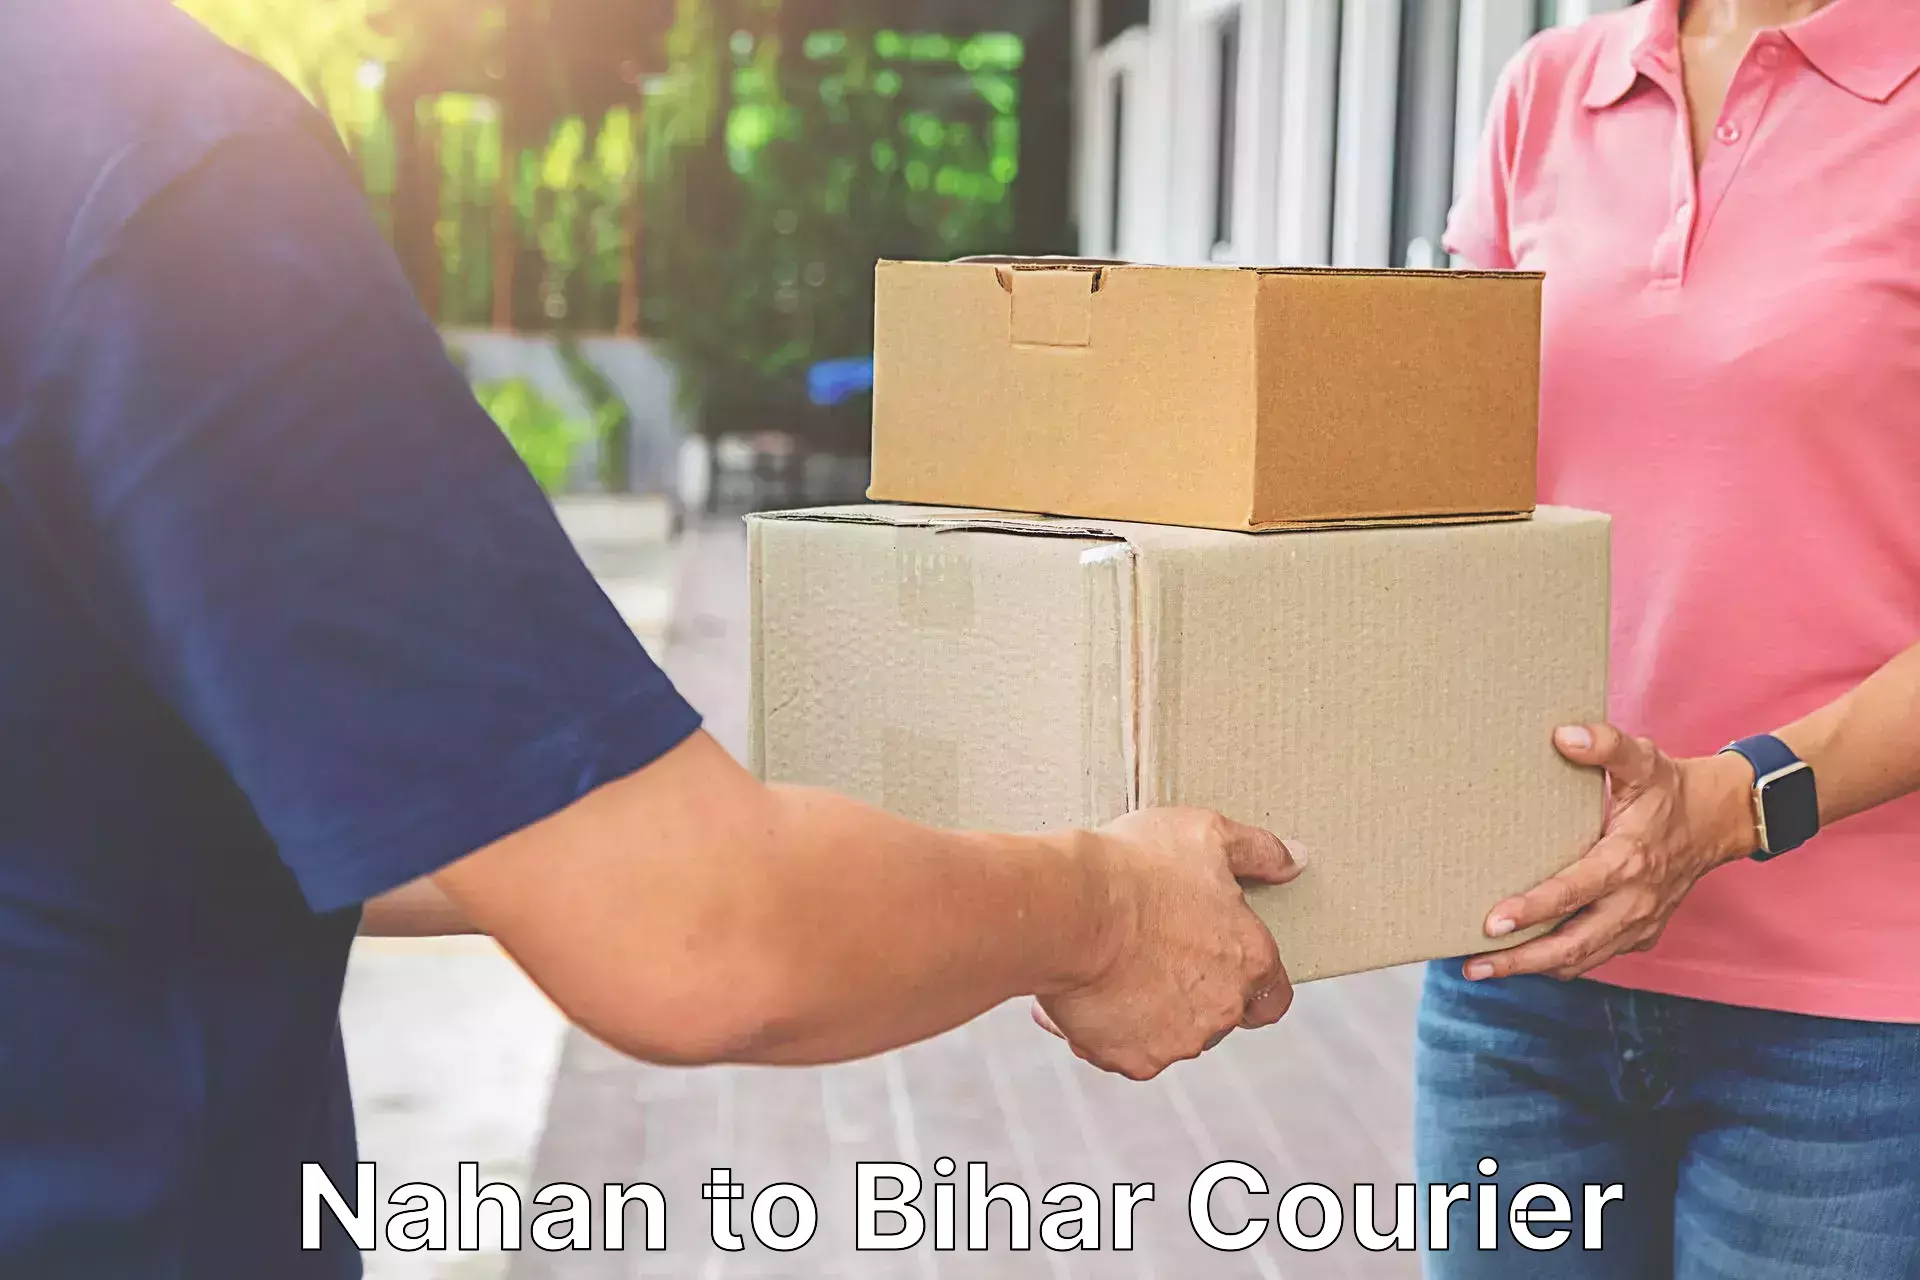 Flexible delivery schedules Nahan to Sheonar